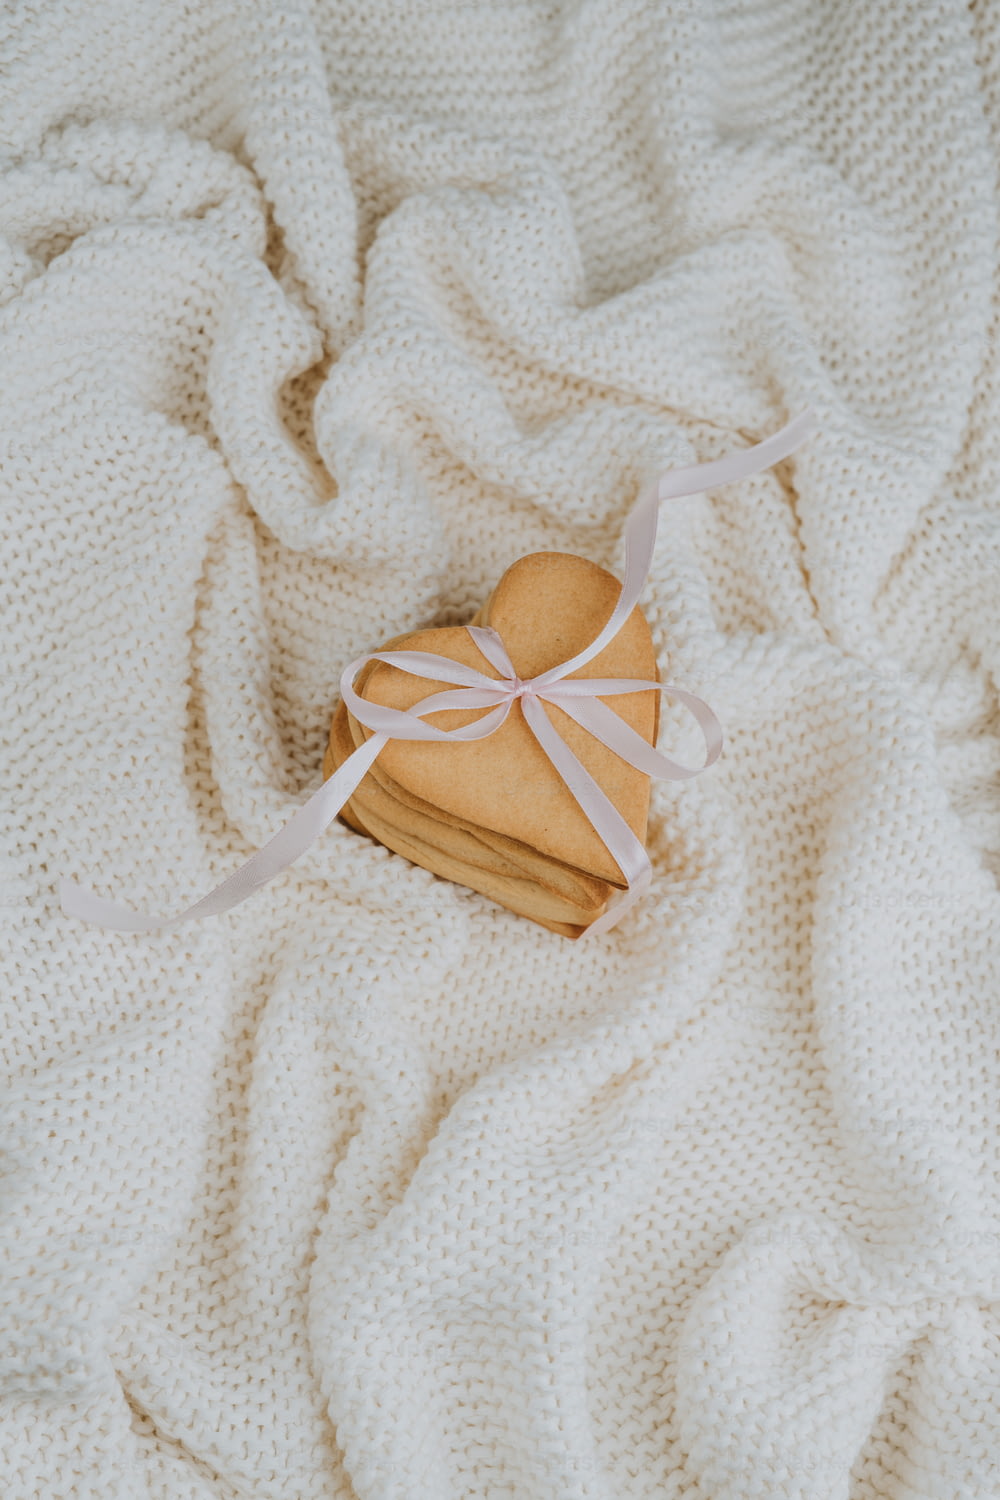 a heart shaped cookie on a white blanket